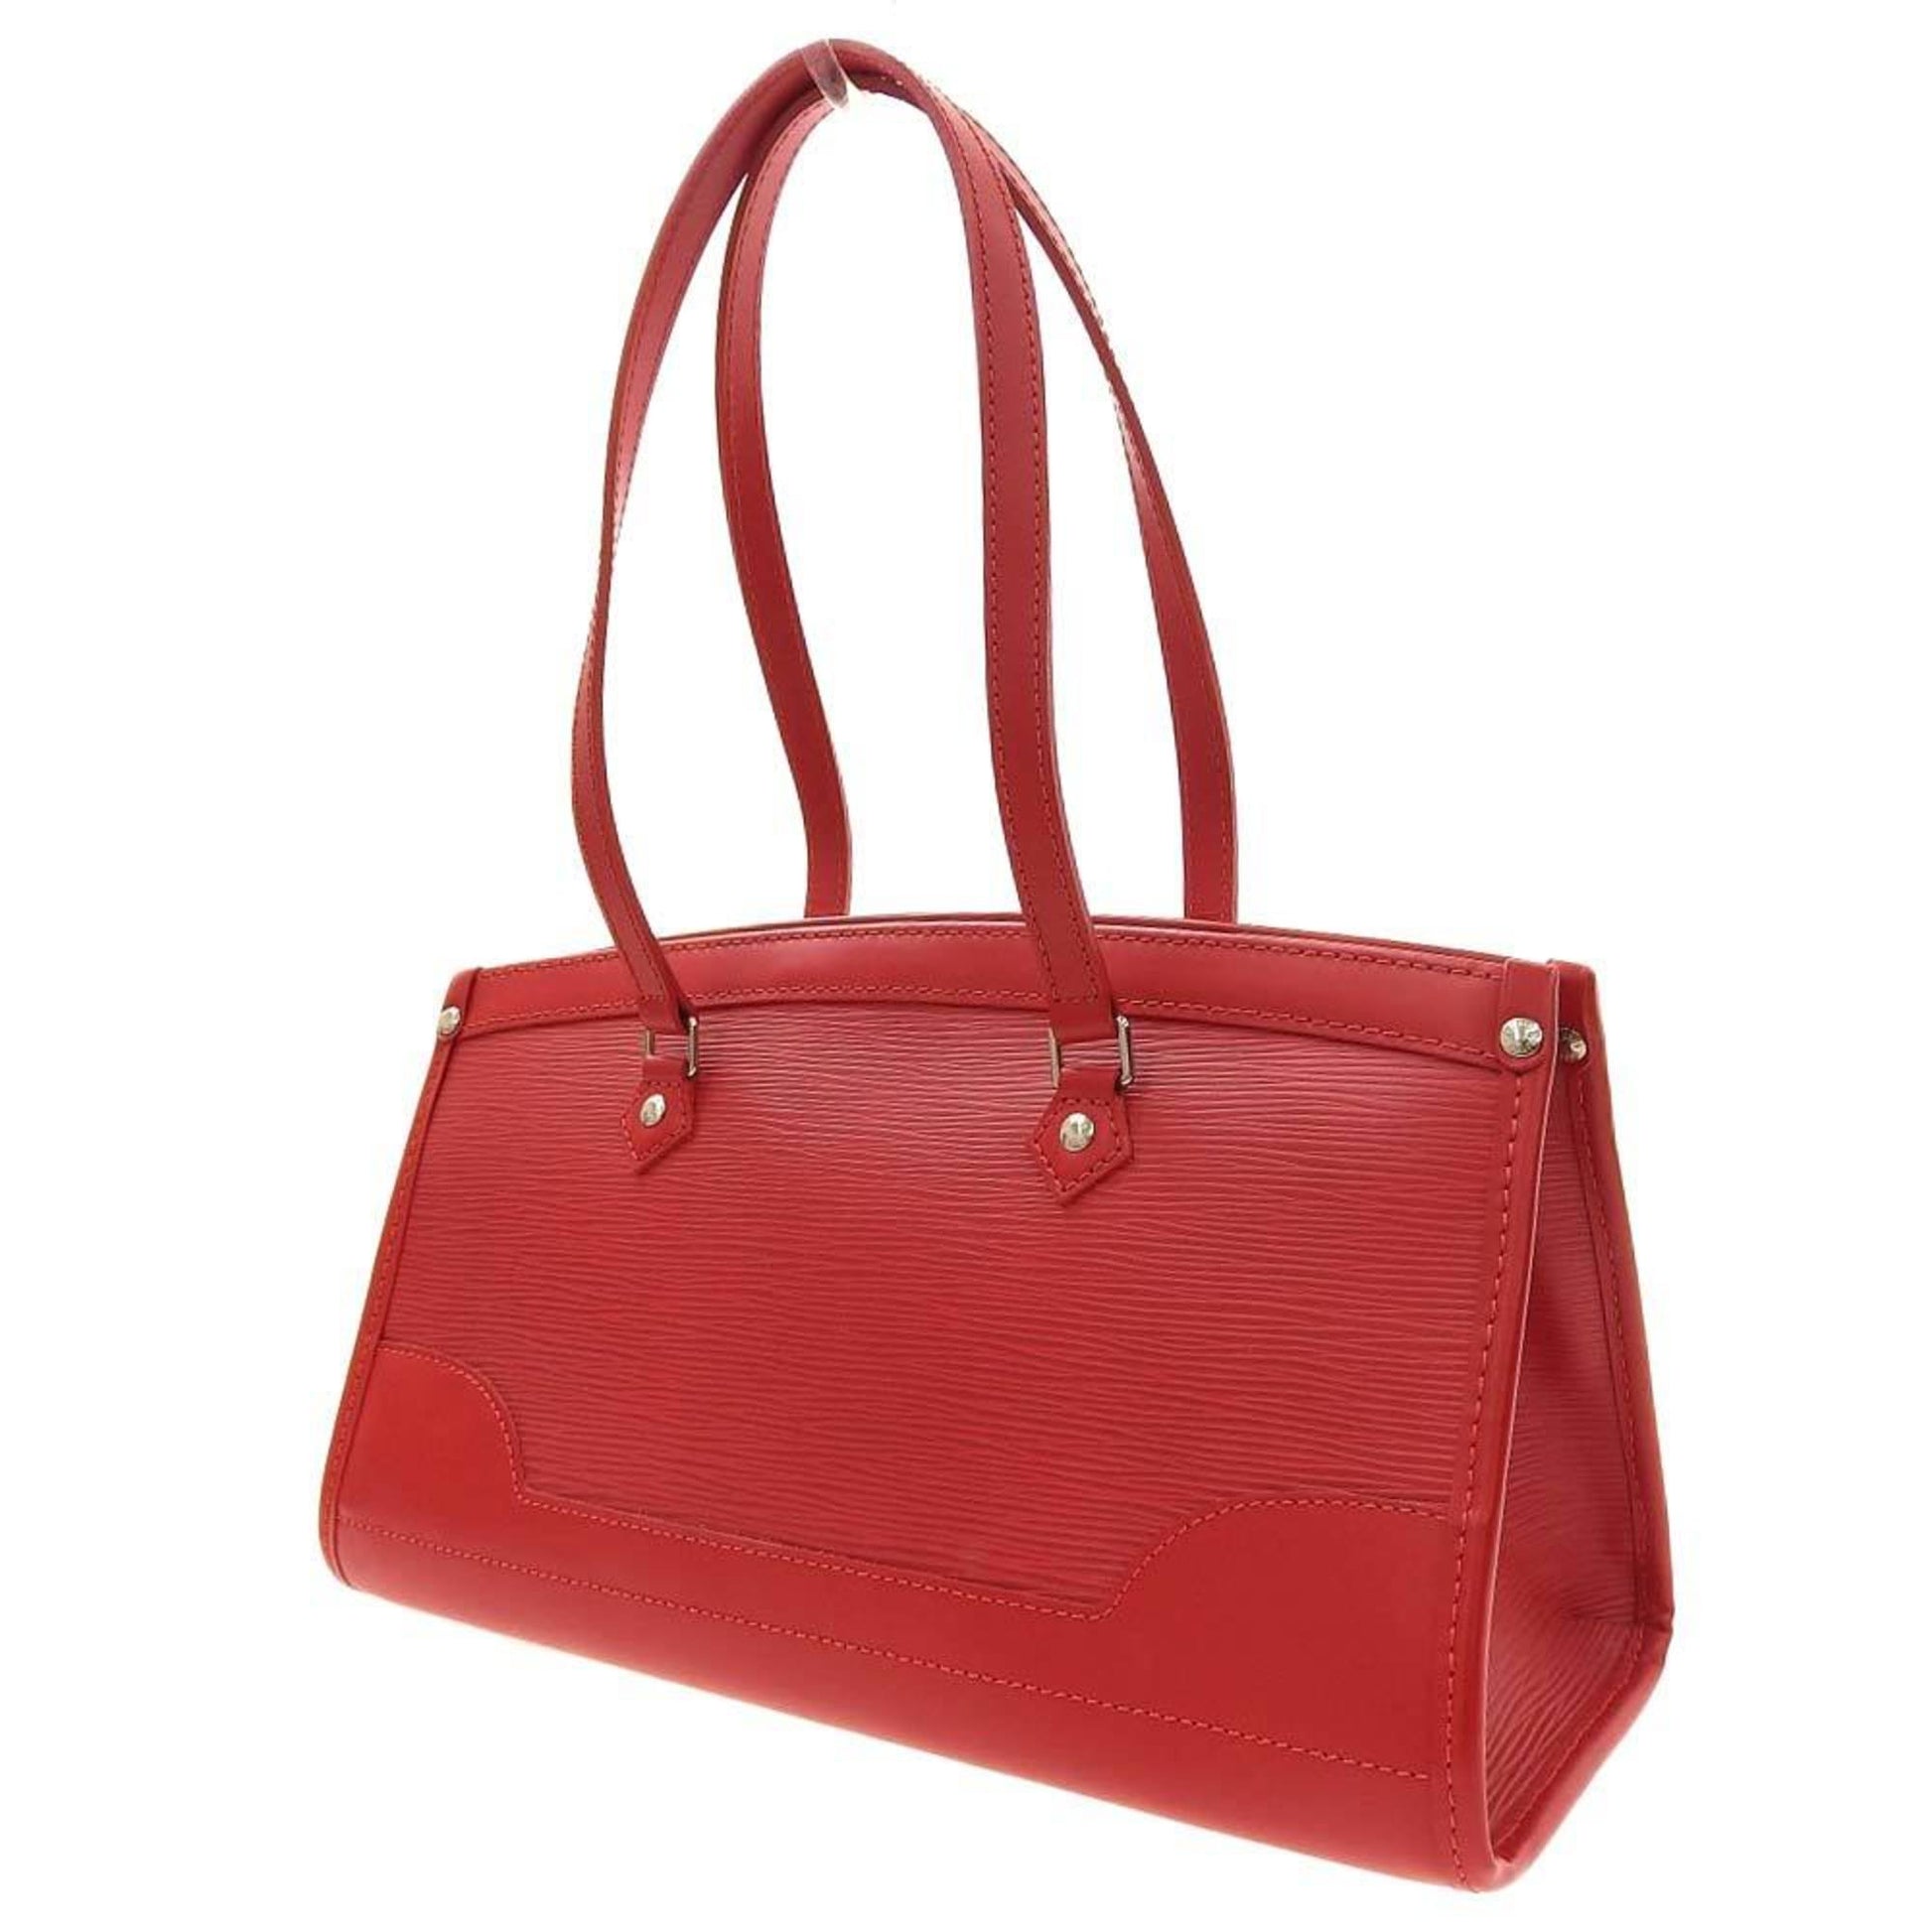 Authentic Louis Vuitton Madeline PM Red Epi Leather